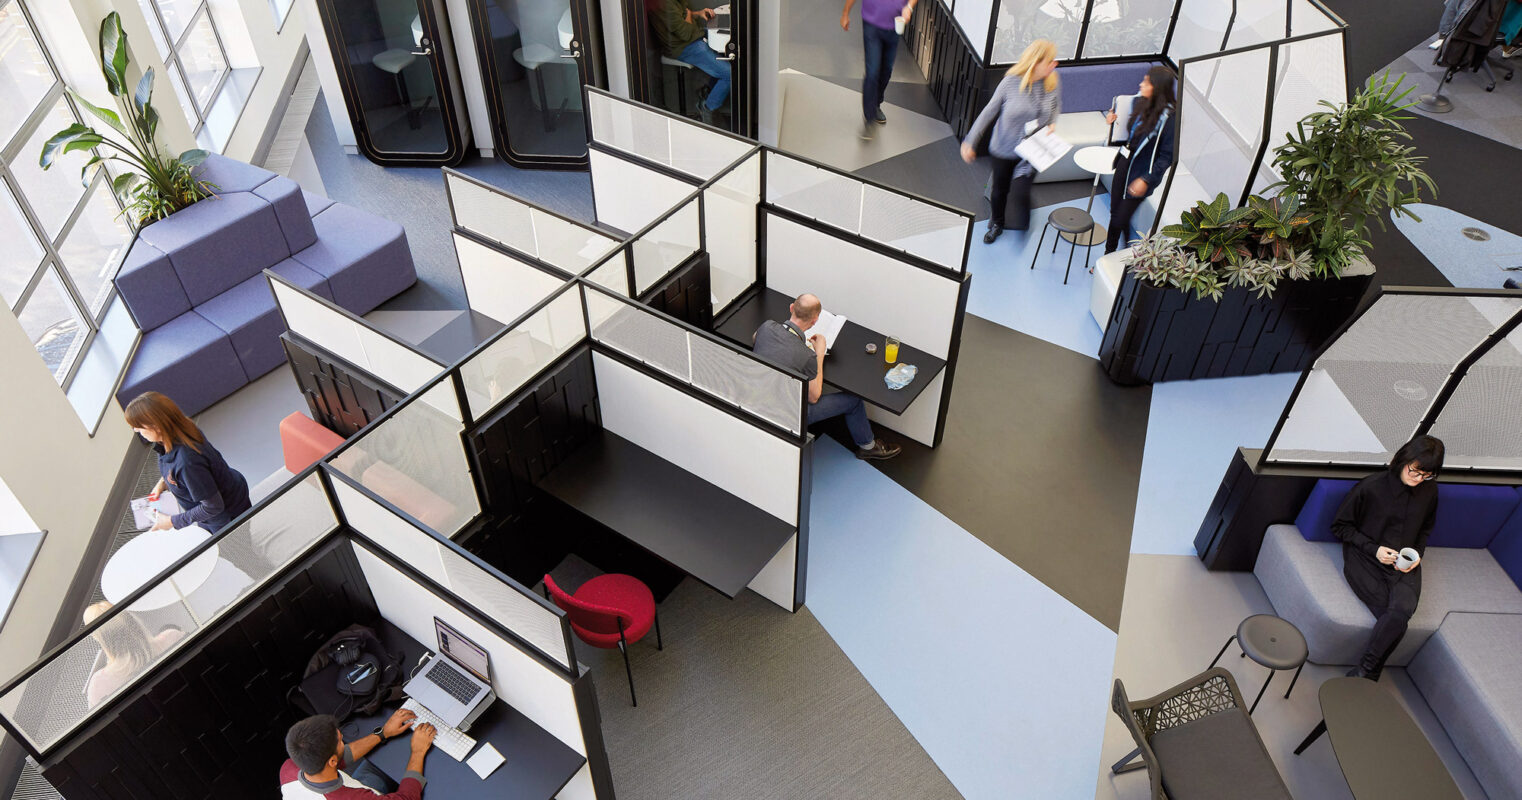 Modern office interior featuring hexagonal pod-like structures for privacy, integrated with open seating areas, and punctuated with indoor greenery to promote a collaborative yet focused work environment. Natural light floods the space, highlighting the geometric forms and the dynamic interaction between communal and personal workspaces.